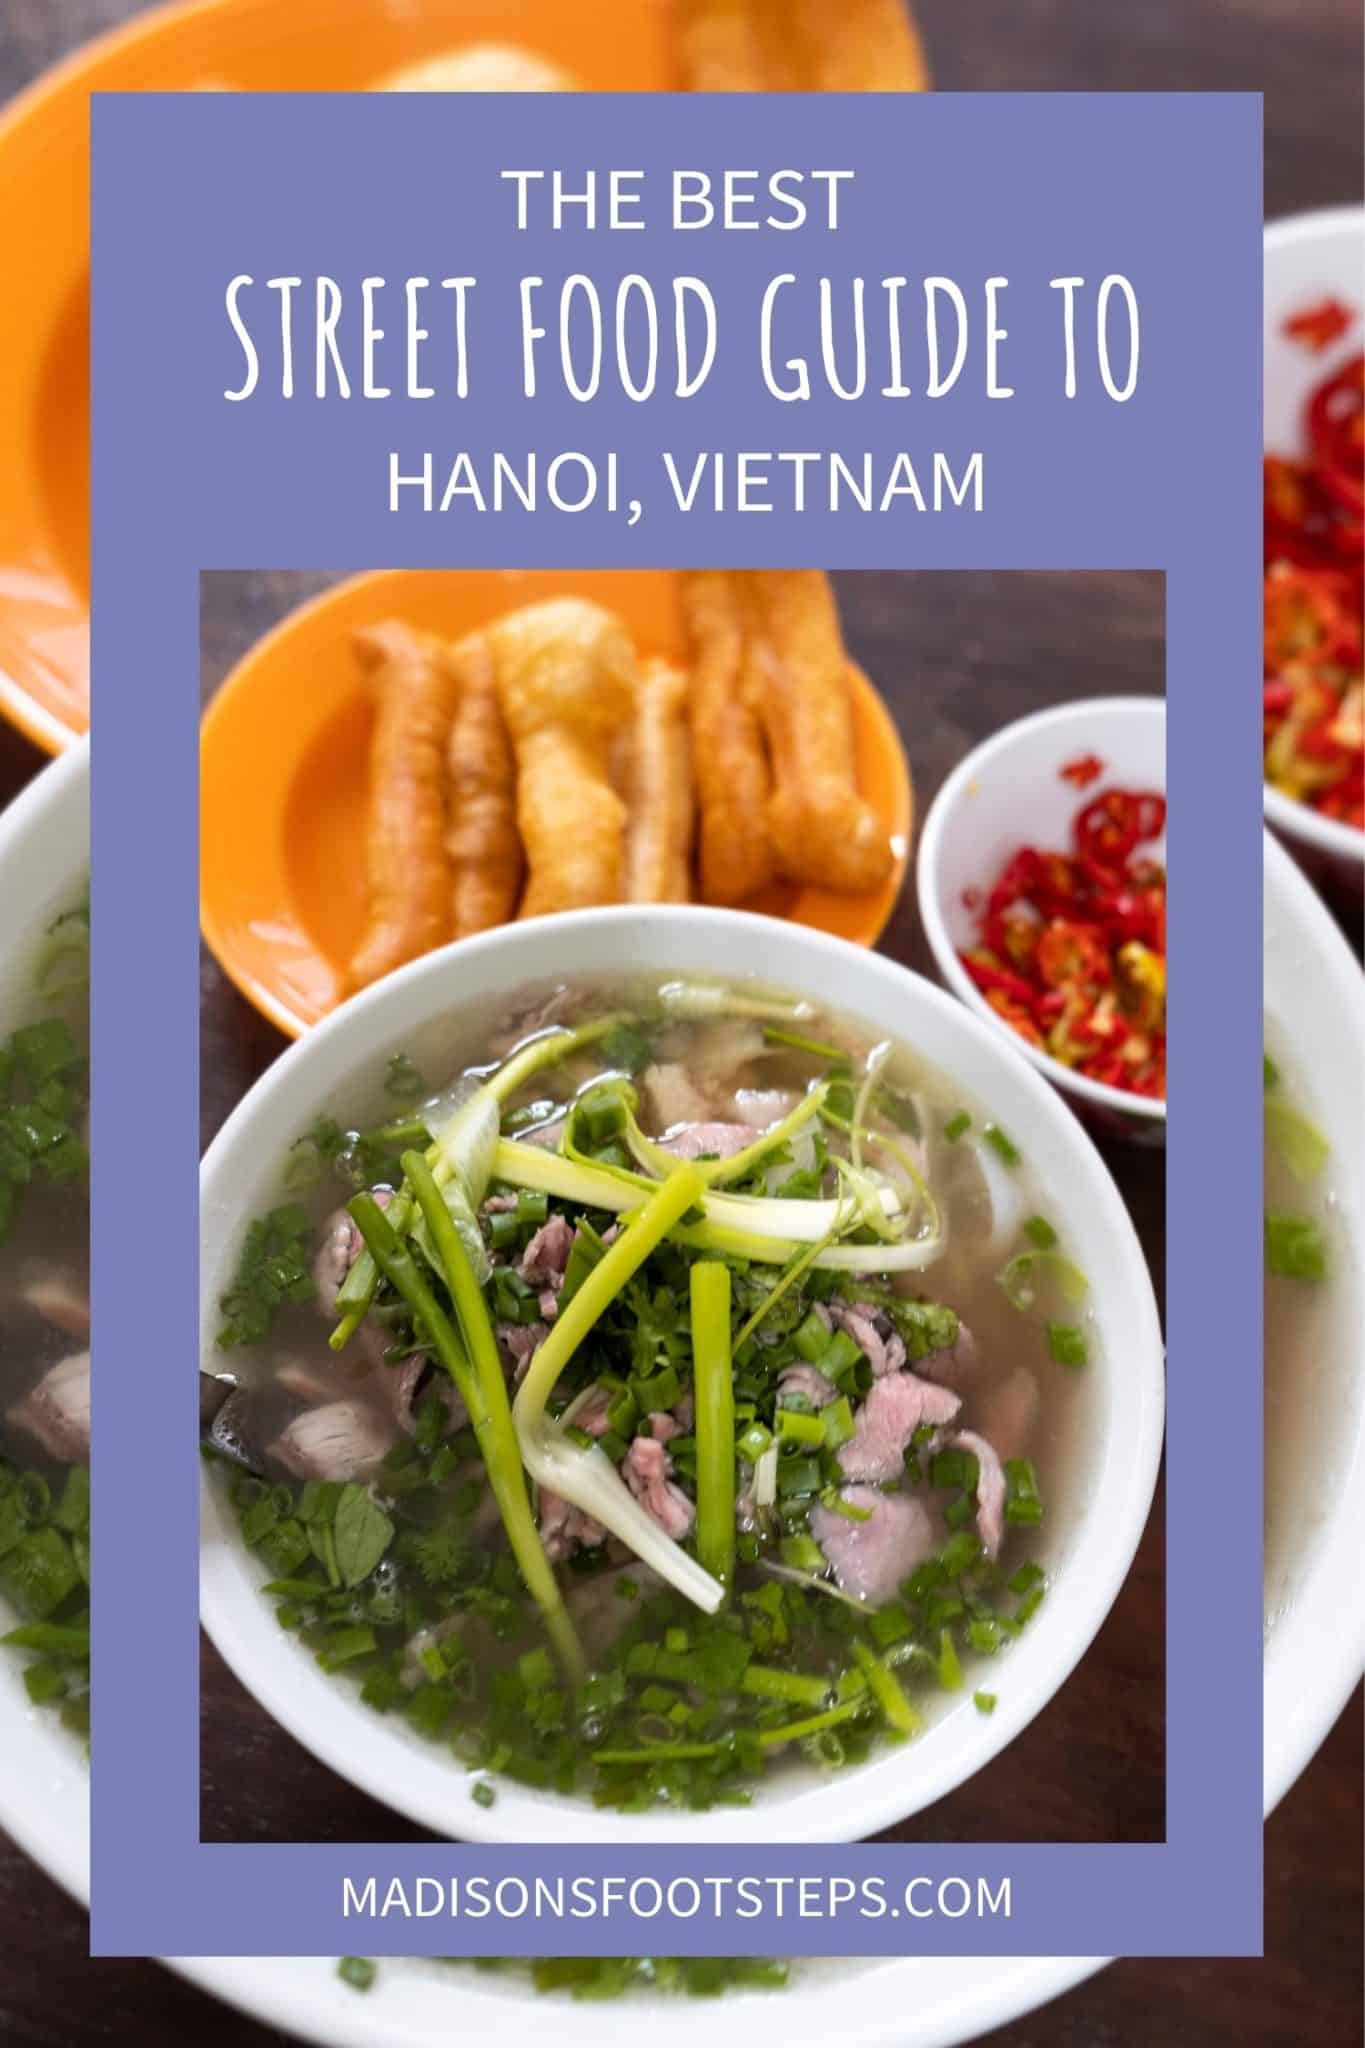 Your Ultimate Guide to Street Food in Hanoi - Madison's Footsteps